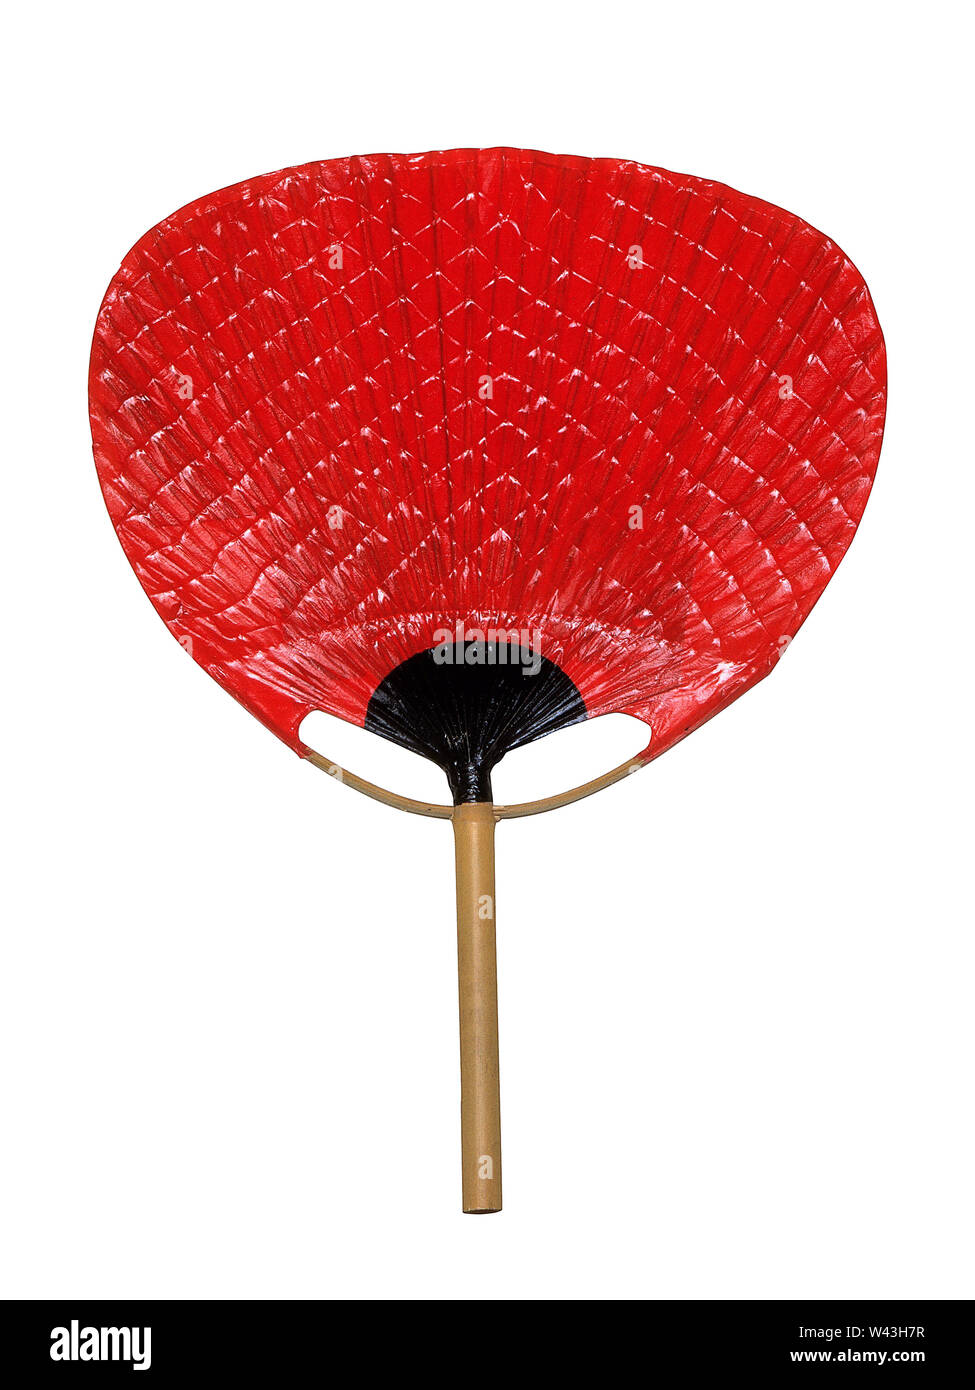 Red Hand Fan Isolated on a White Background. Stock Photo